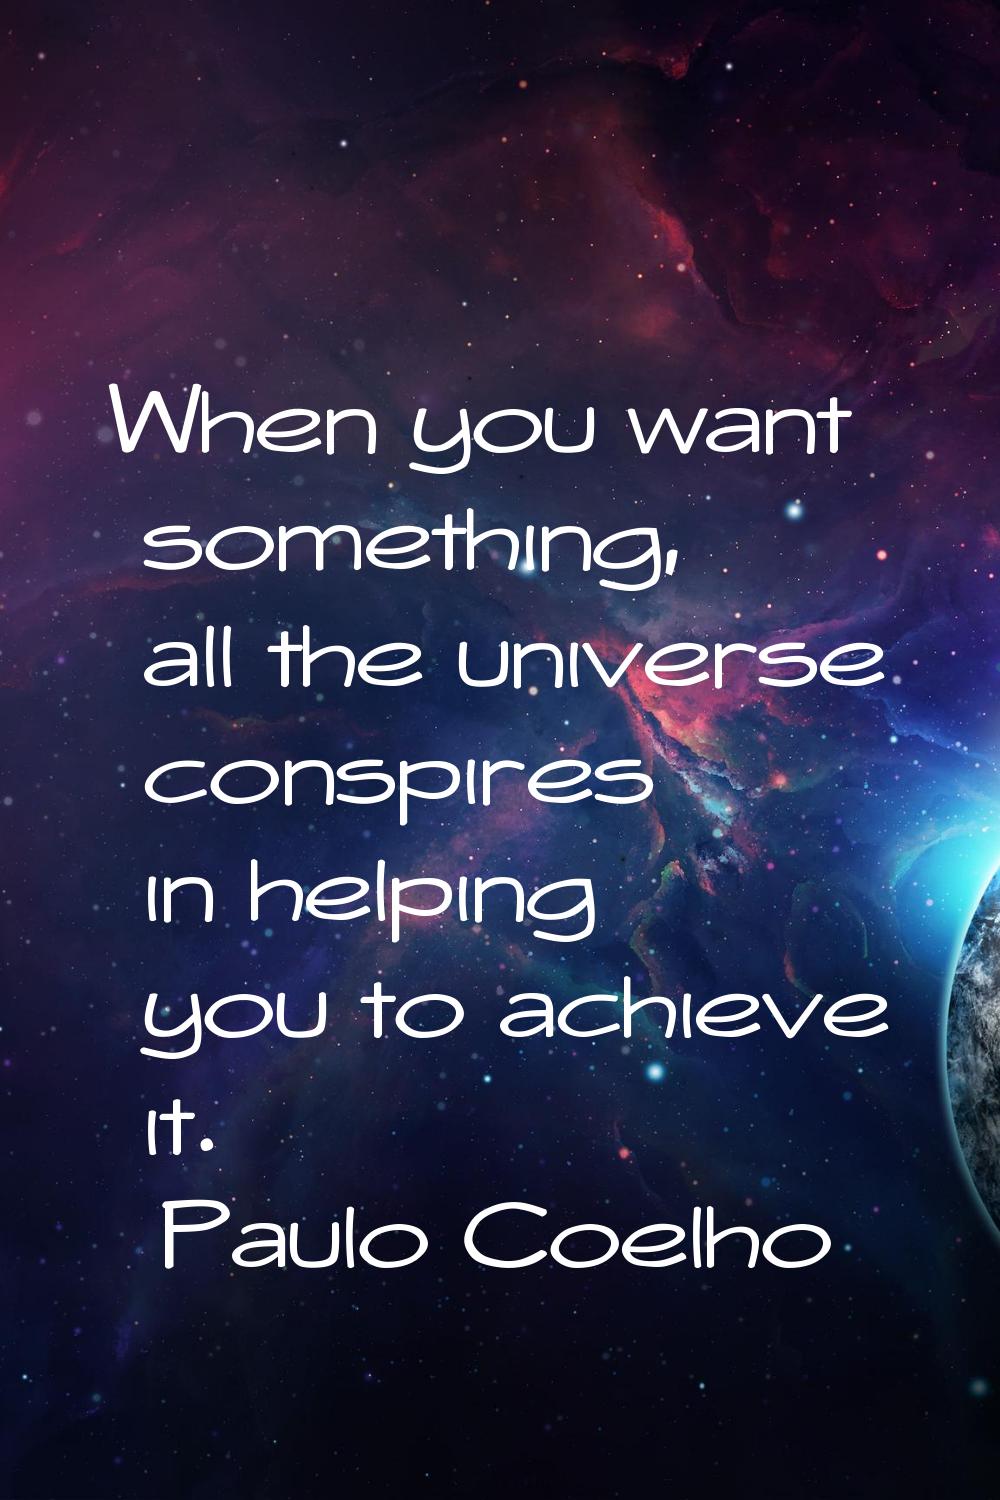 When you want something, all the universe conspires in helping you to achieve it.